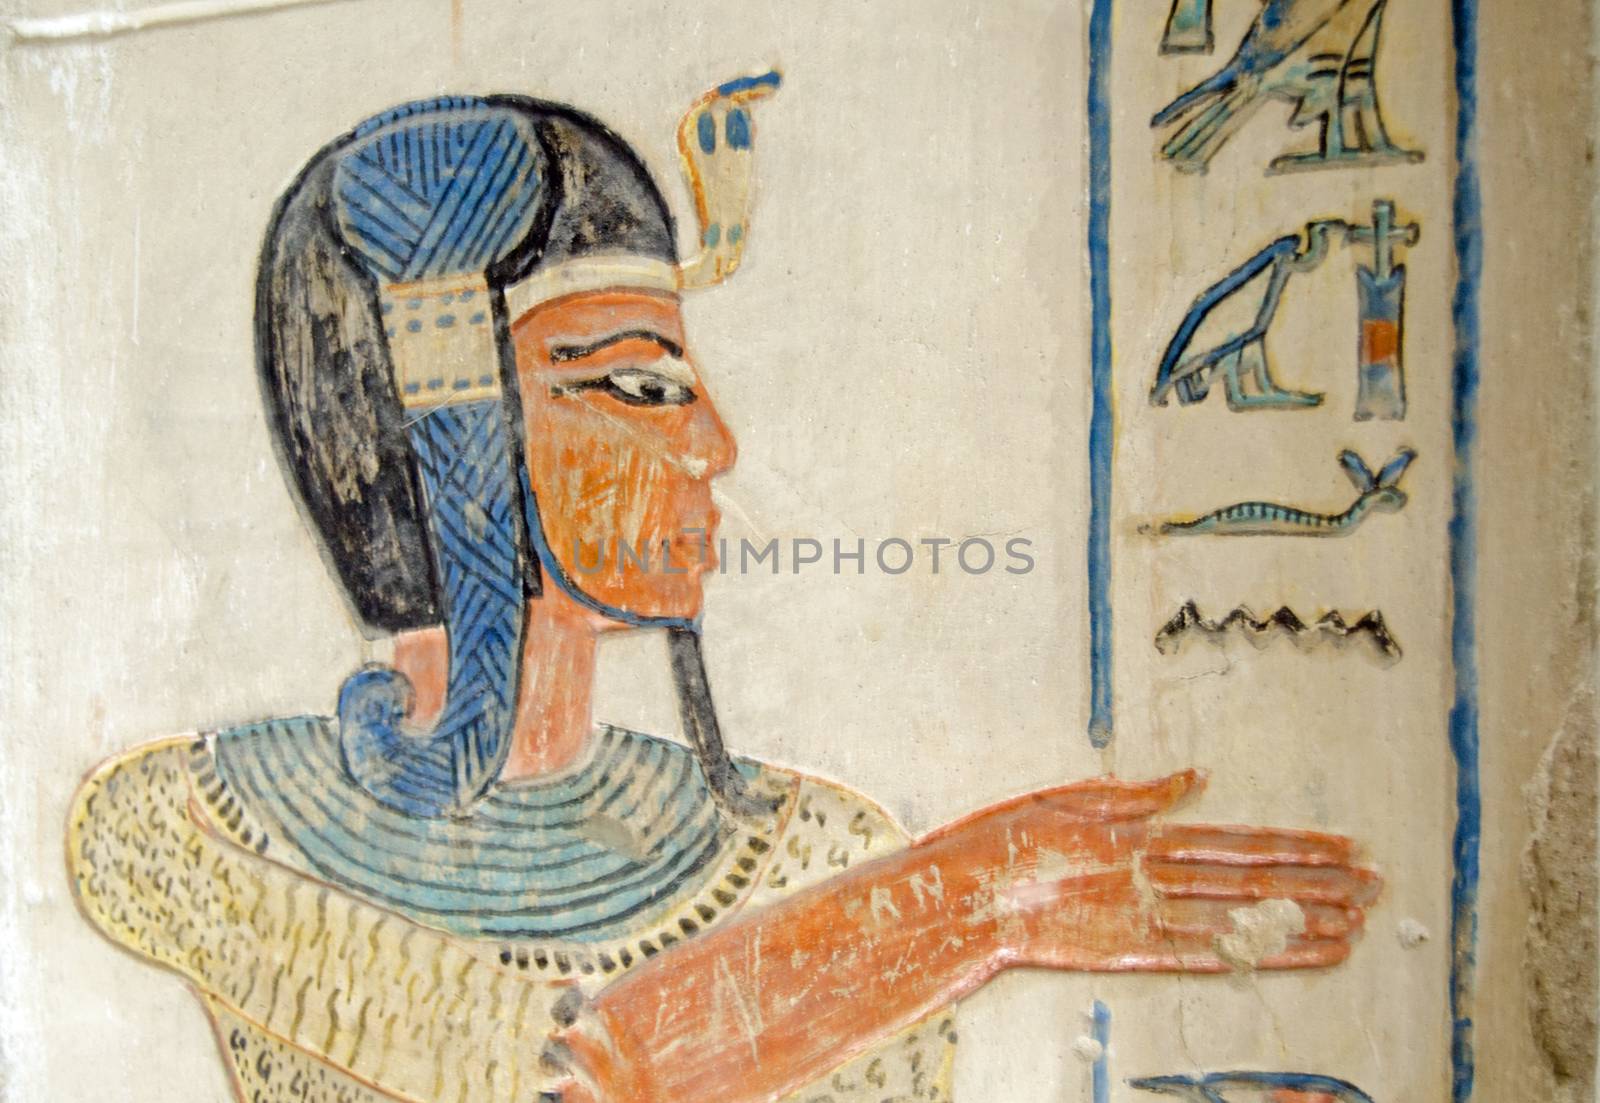 Prince Amunherkhopshef, son of Pharaoh Ramses III painted onto the wall of his tomb at the Valley of the Queens on the West Bank of the Nile at Luxor, Egypt.  Ancient Egyptian mural, thousands of years old.